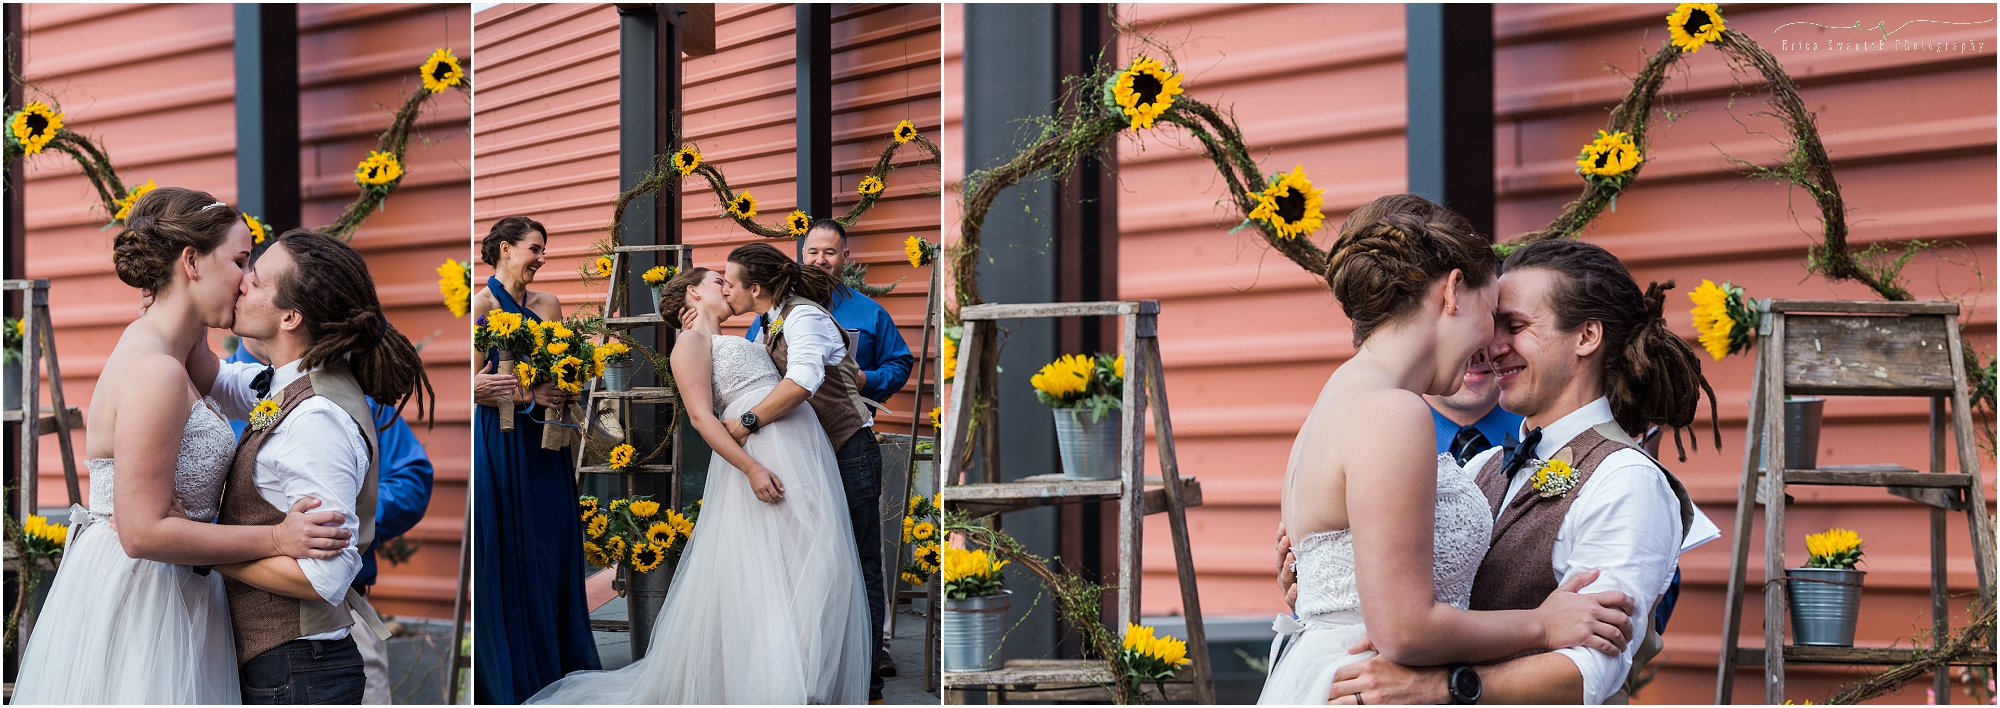 This hipster groom goes for the dip of his bride with his first kiss at his Worthy Brewing Wedding in Bend Oregon. | Erica Swantek Photography